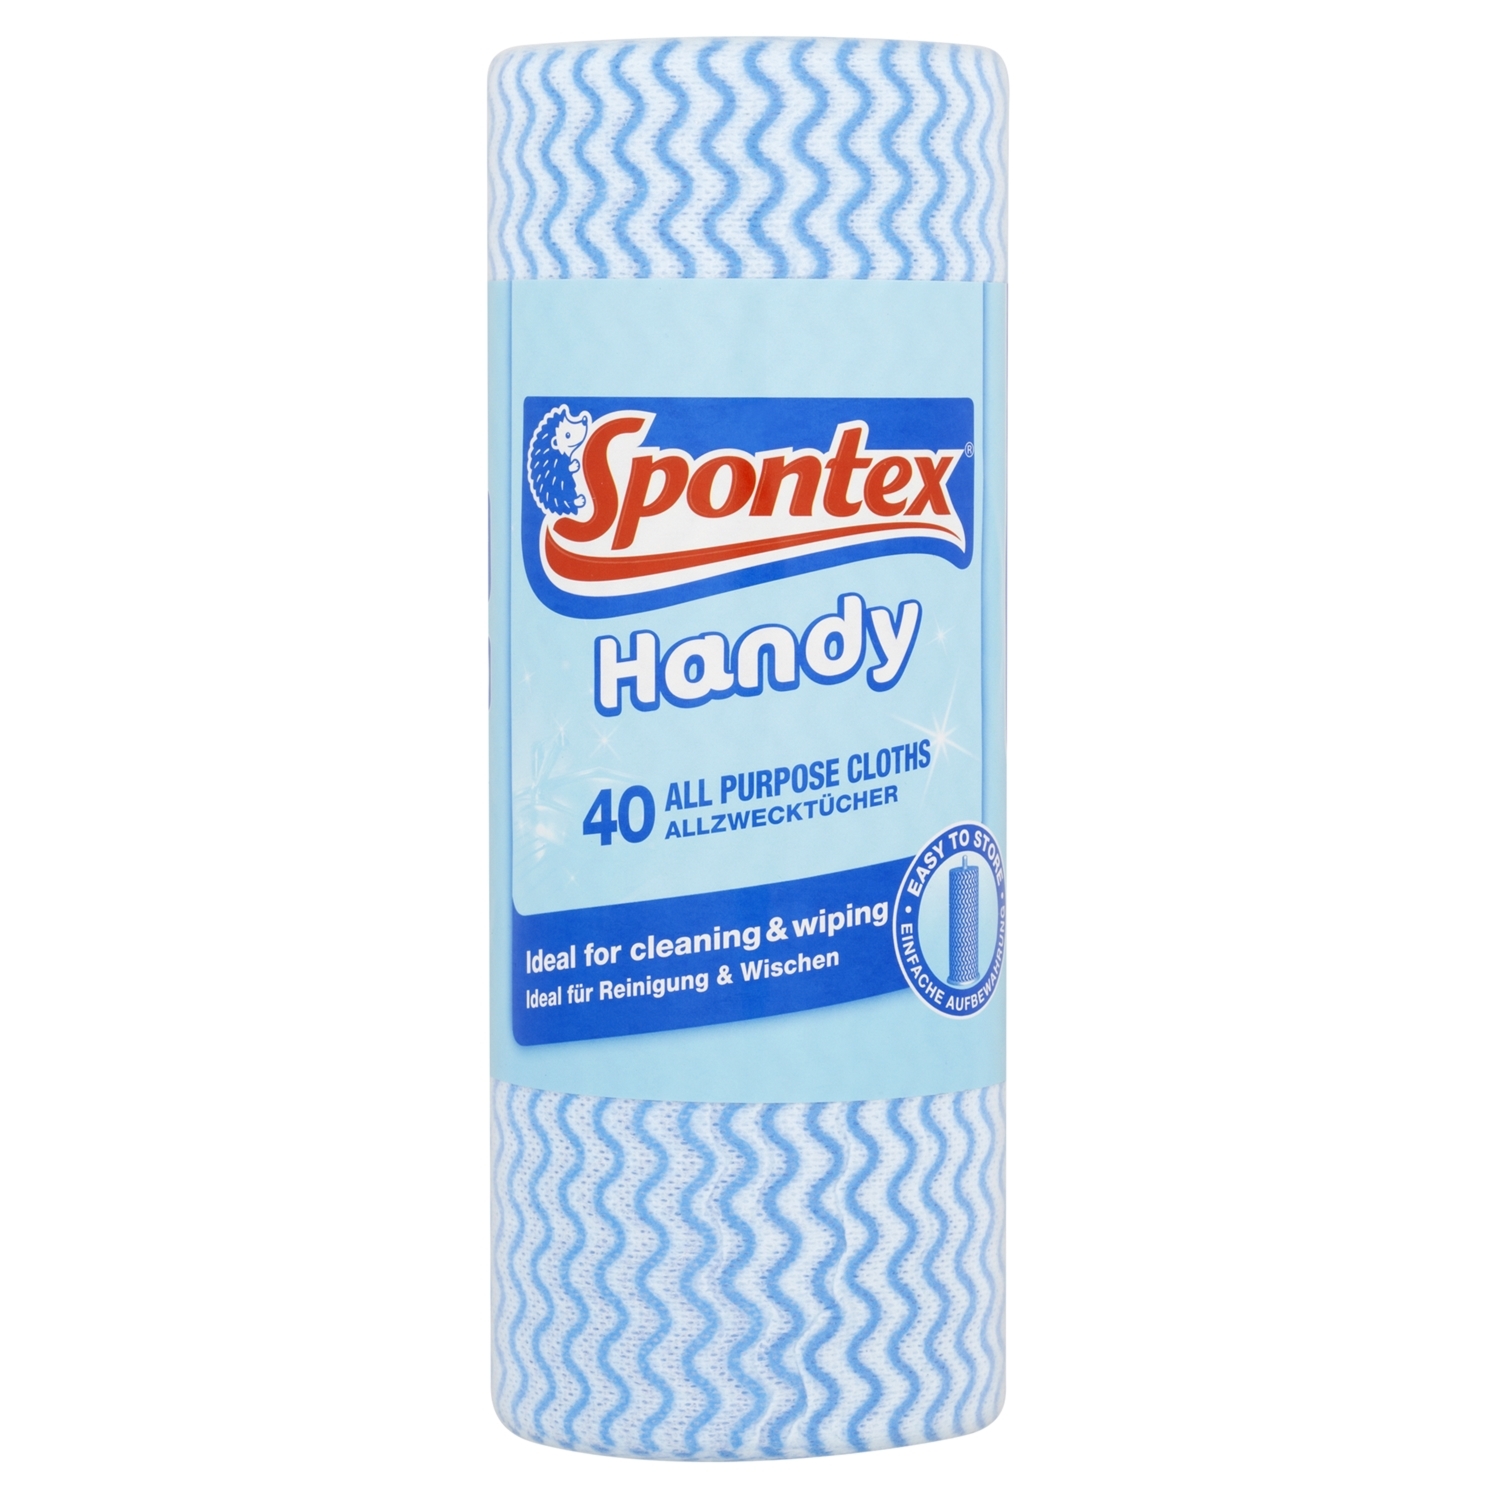 Spontex Handy Cleaning Cloth 40 Pack Image